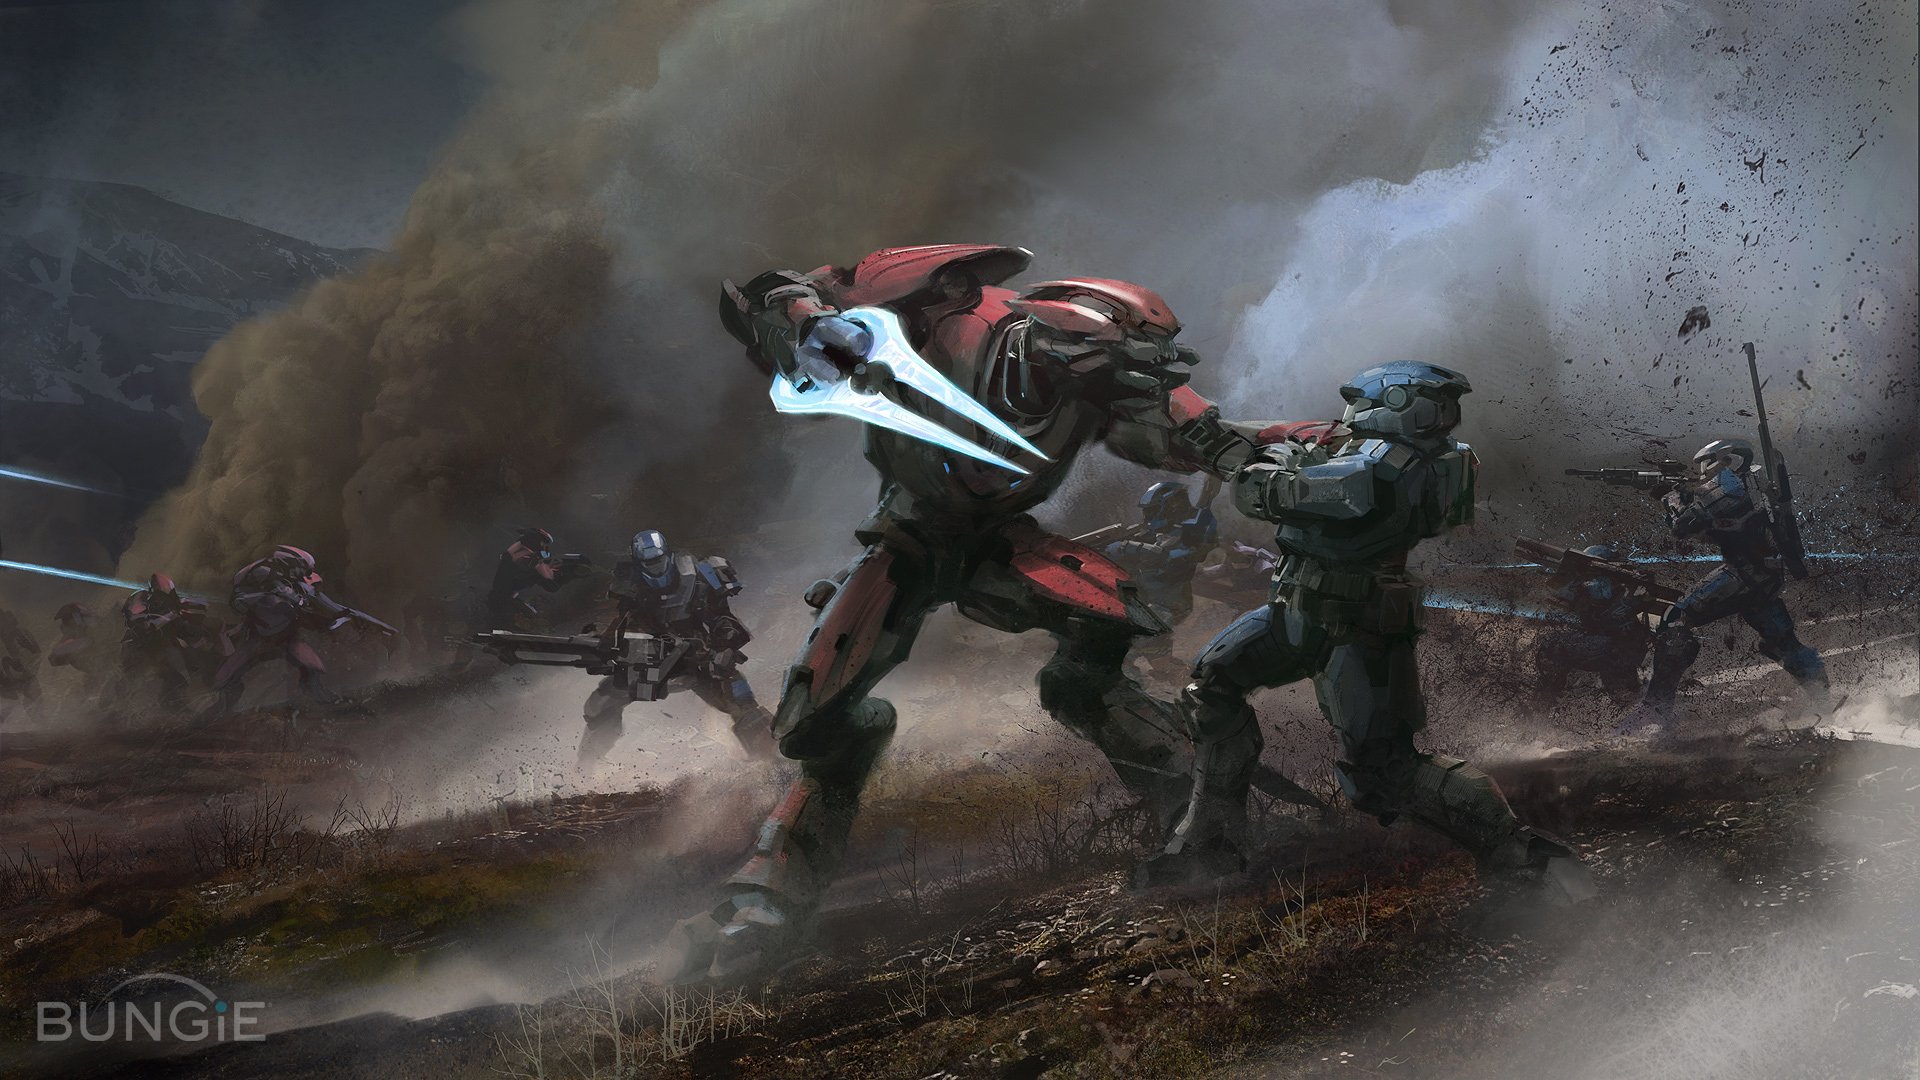 0 Halowallpaper Ideas About Halo Reach Xbox One On - Halo Reach , HD Wallpaper & Backgrounds